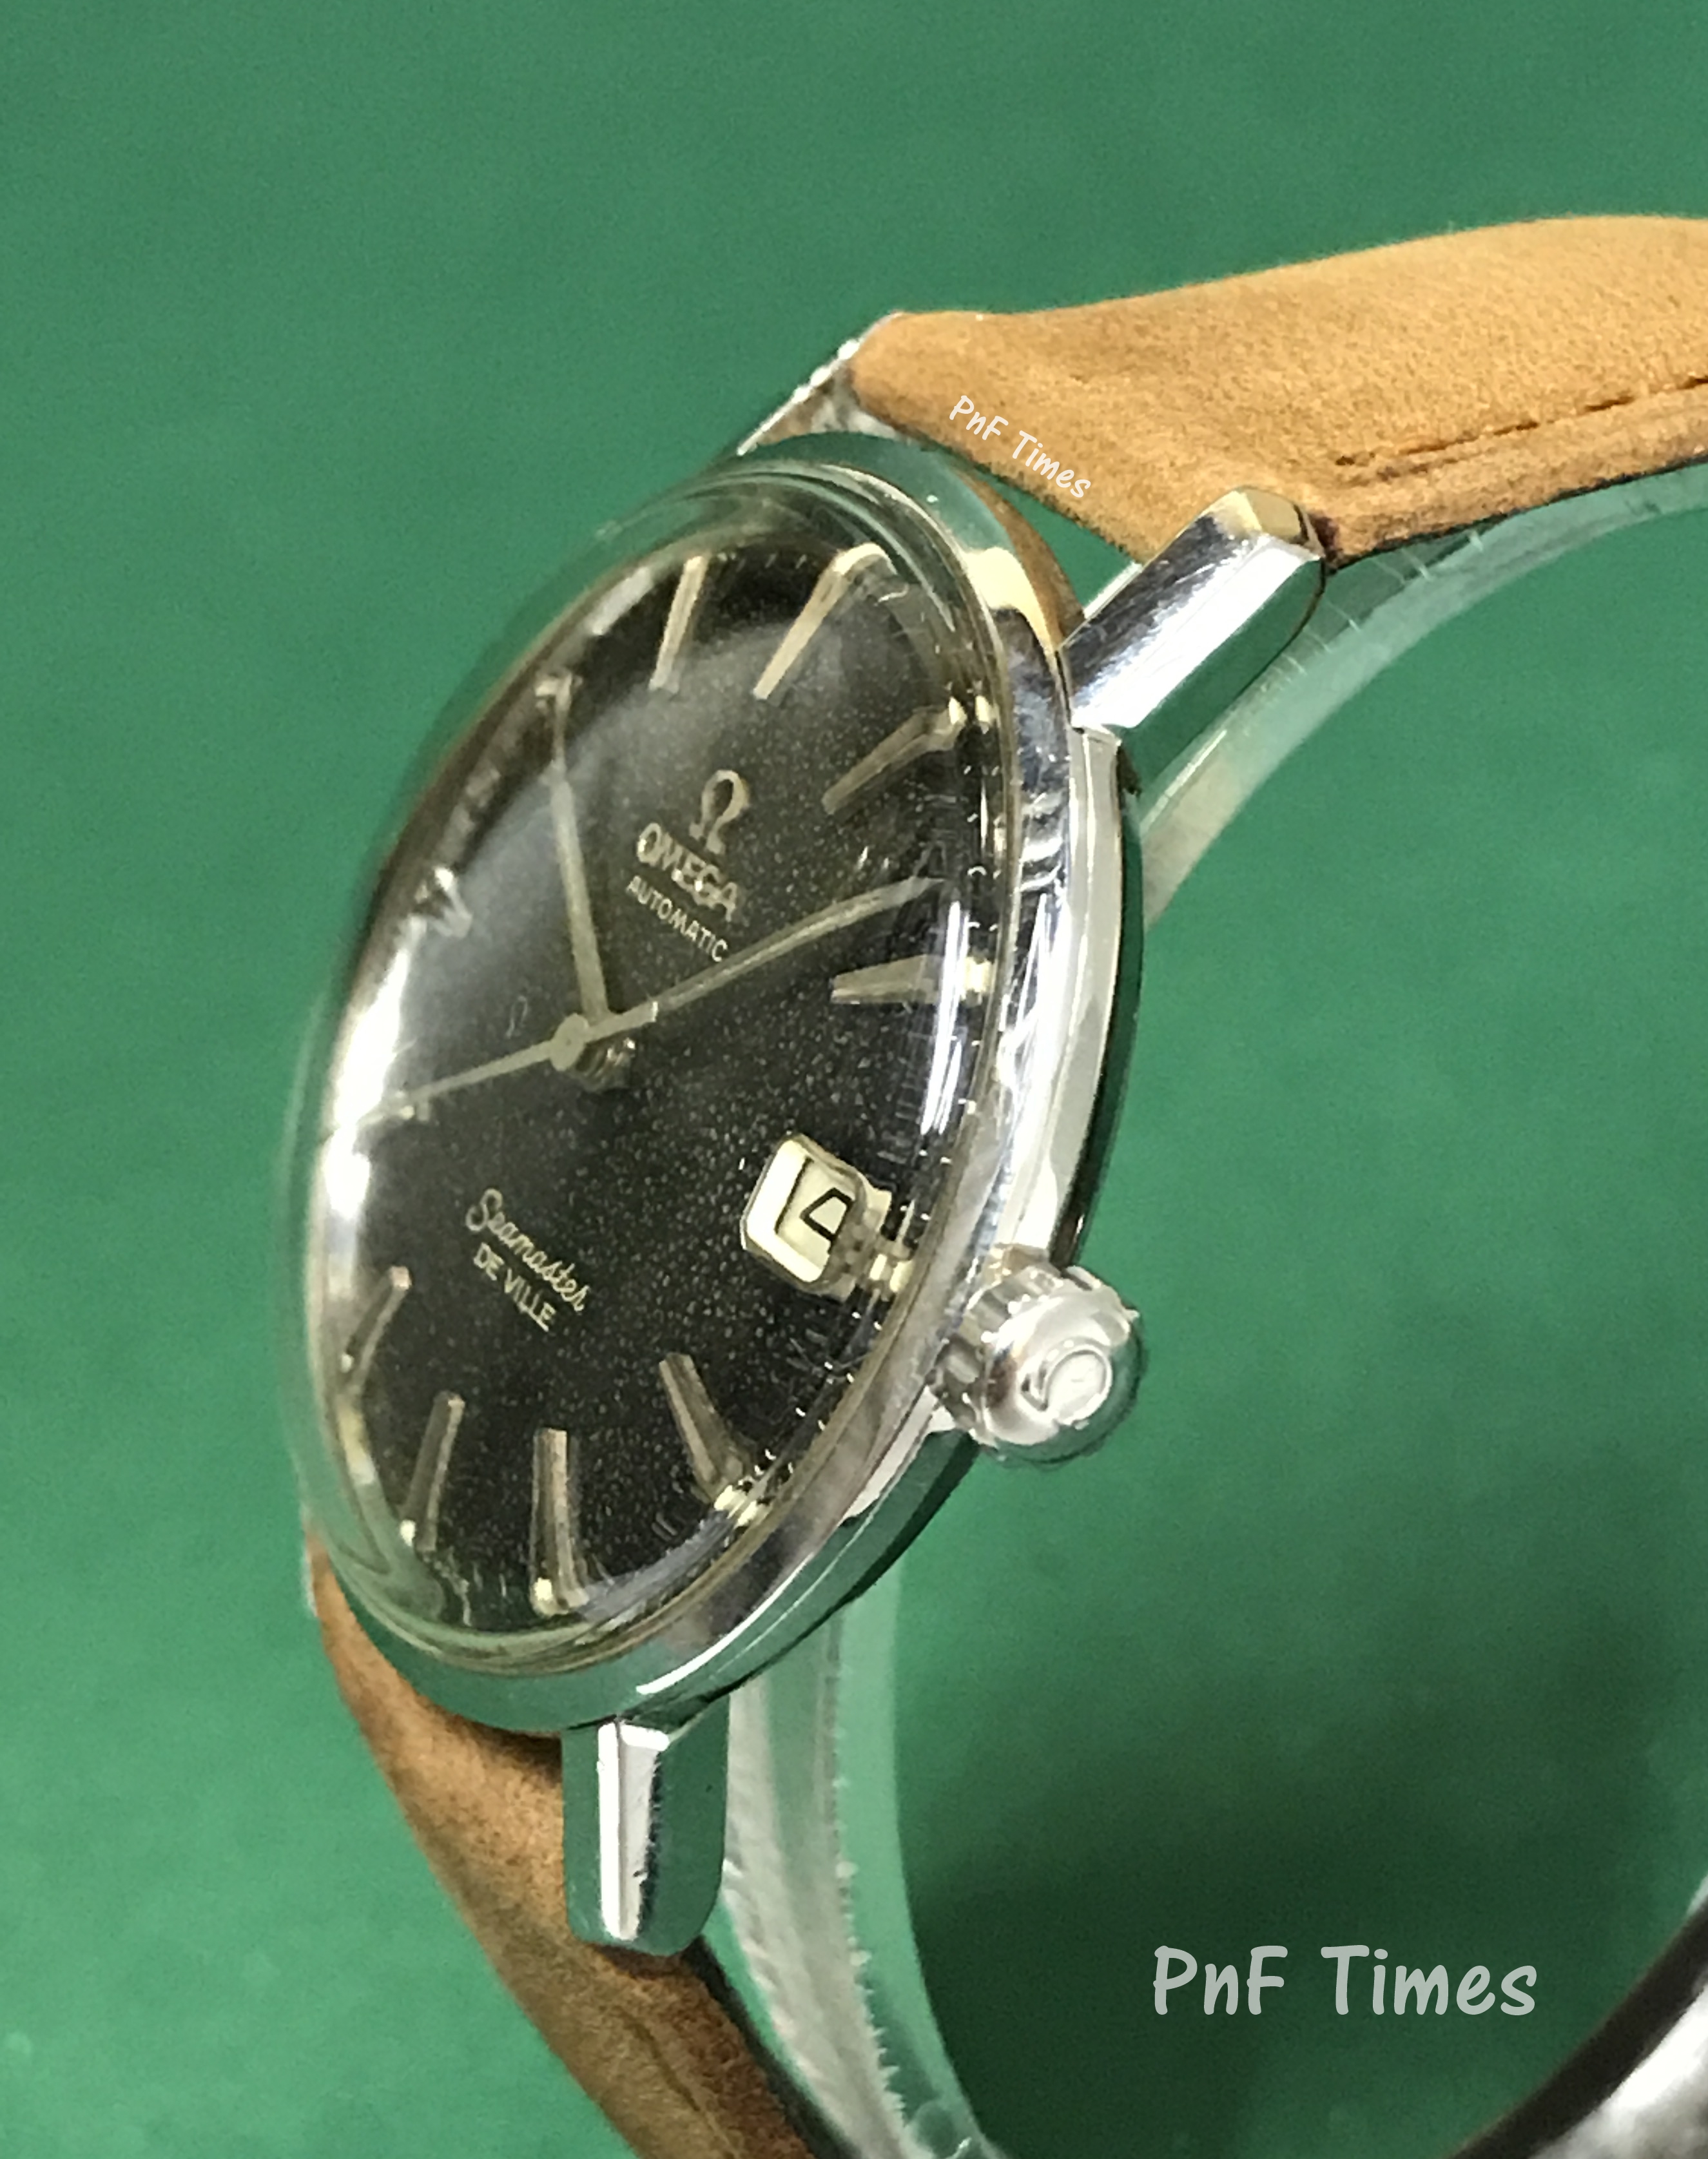 seamaster with leather strap